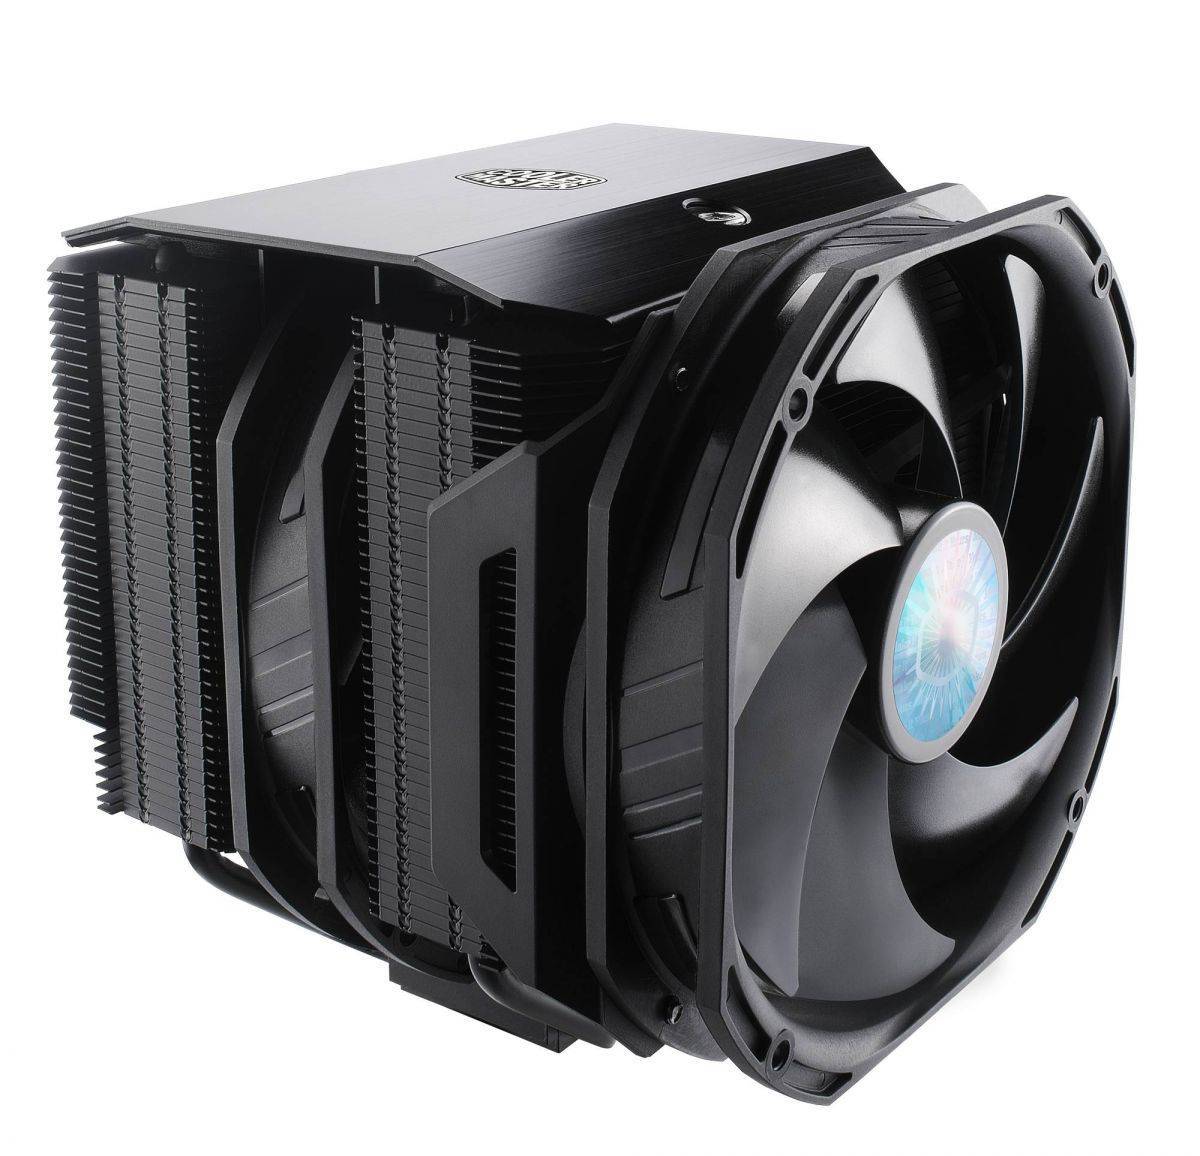 Cooler Master CPU Cooler MasterAir MA624 Stealth, 250W, Full Socket Support